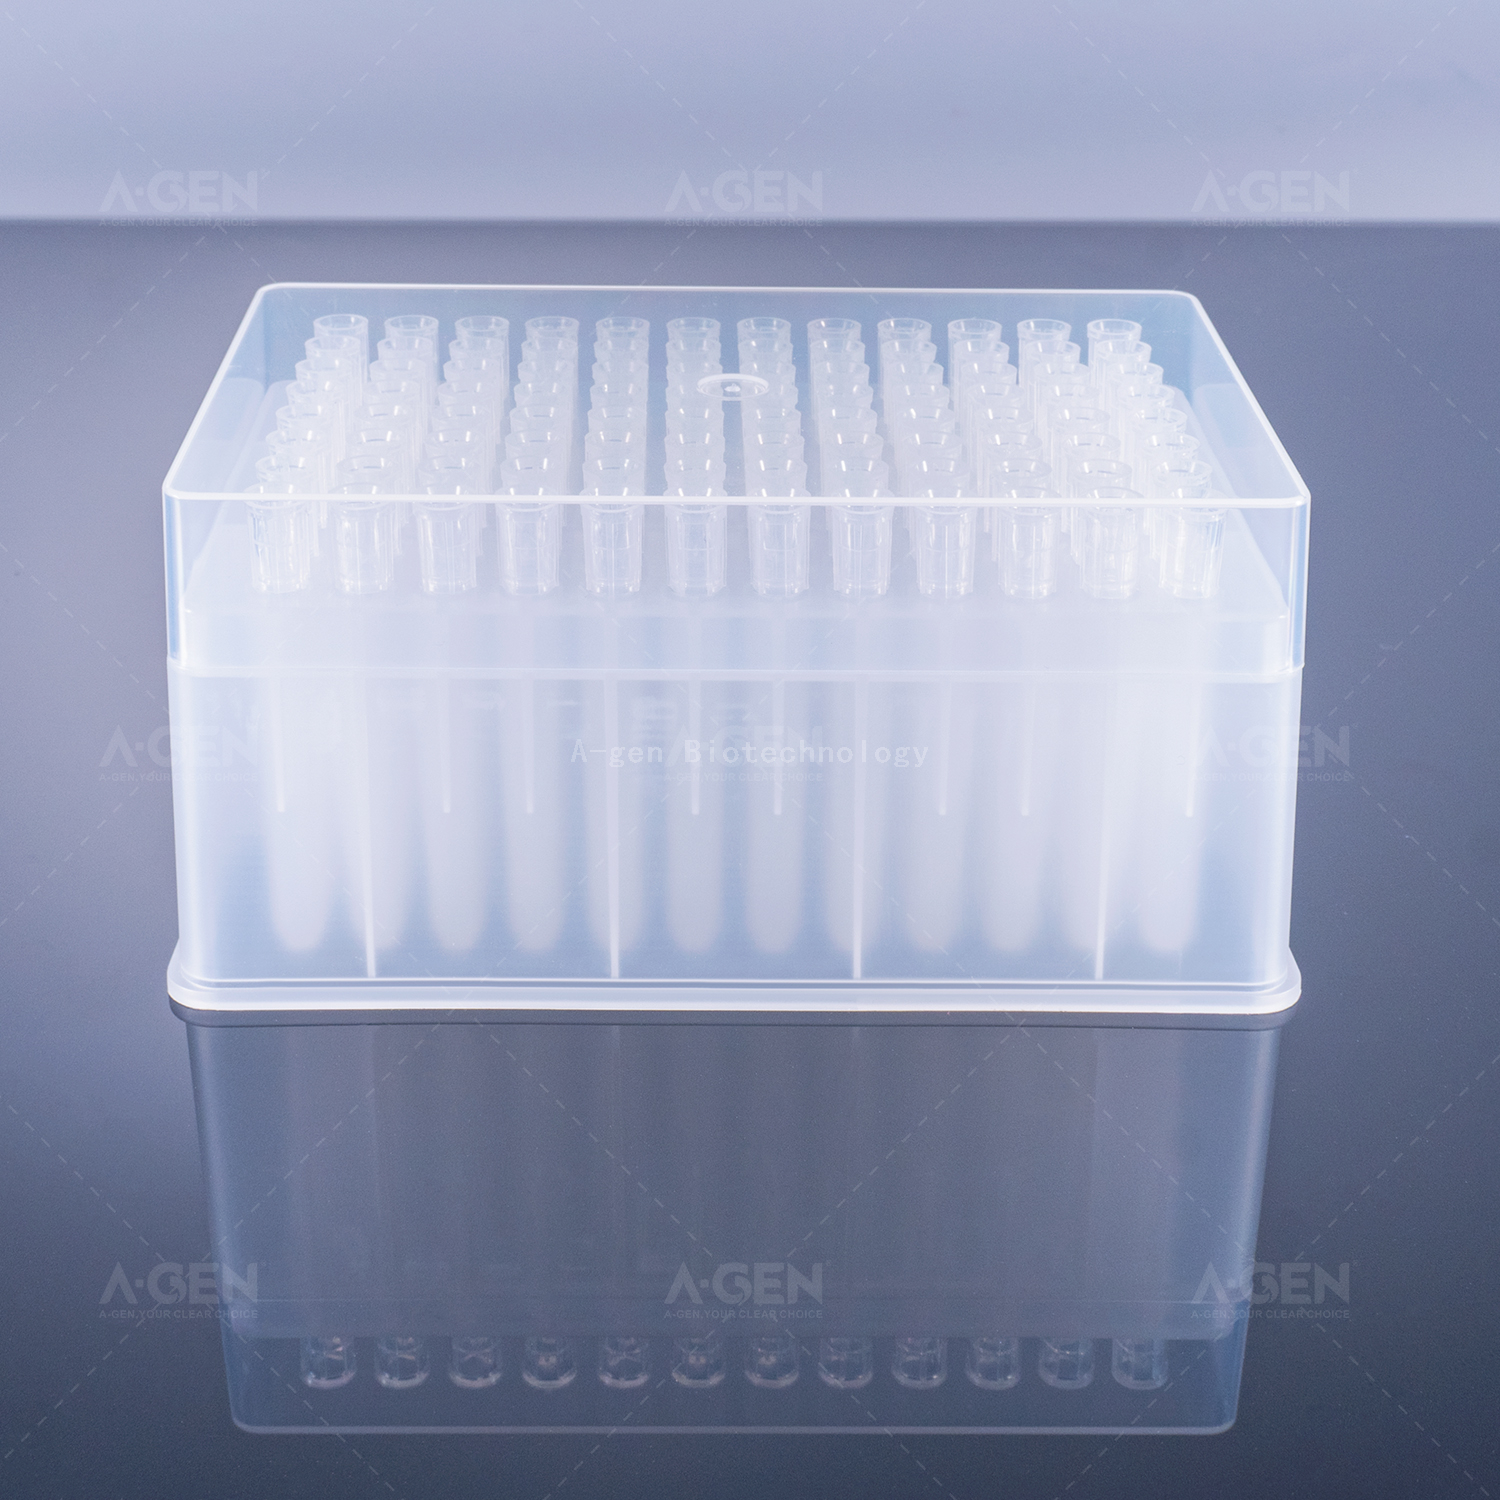 Nayo Tip 50μL Clear Robotic PP Pipette Tip (Racked,sterilized) for Liquid Transfer No Filter FX-50-RSL Low Residual